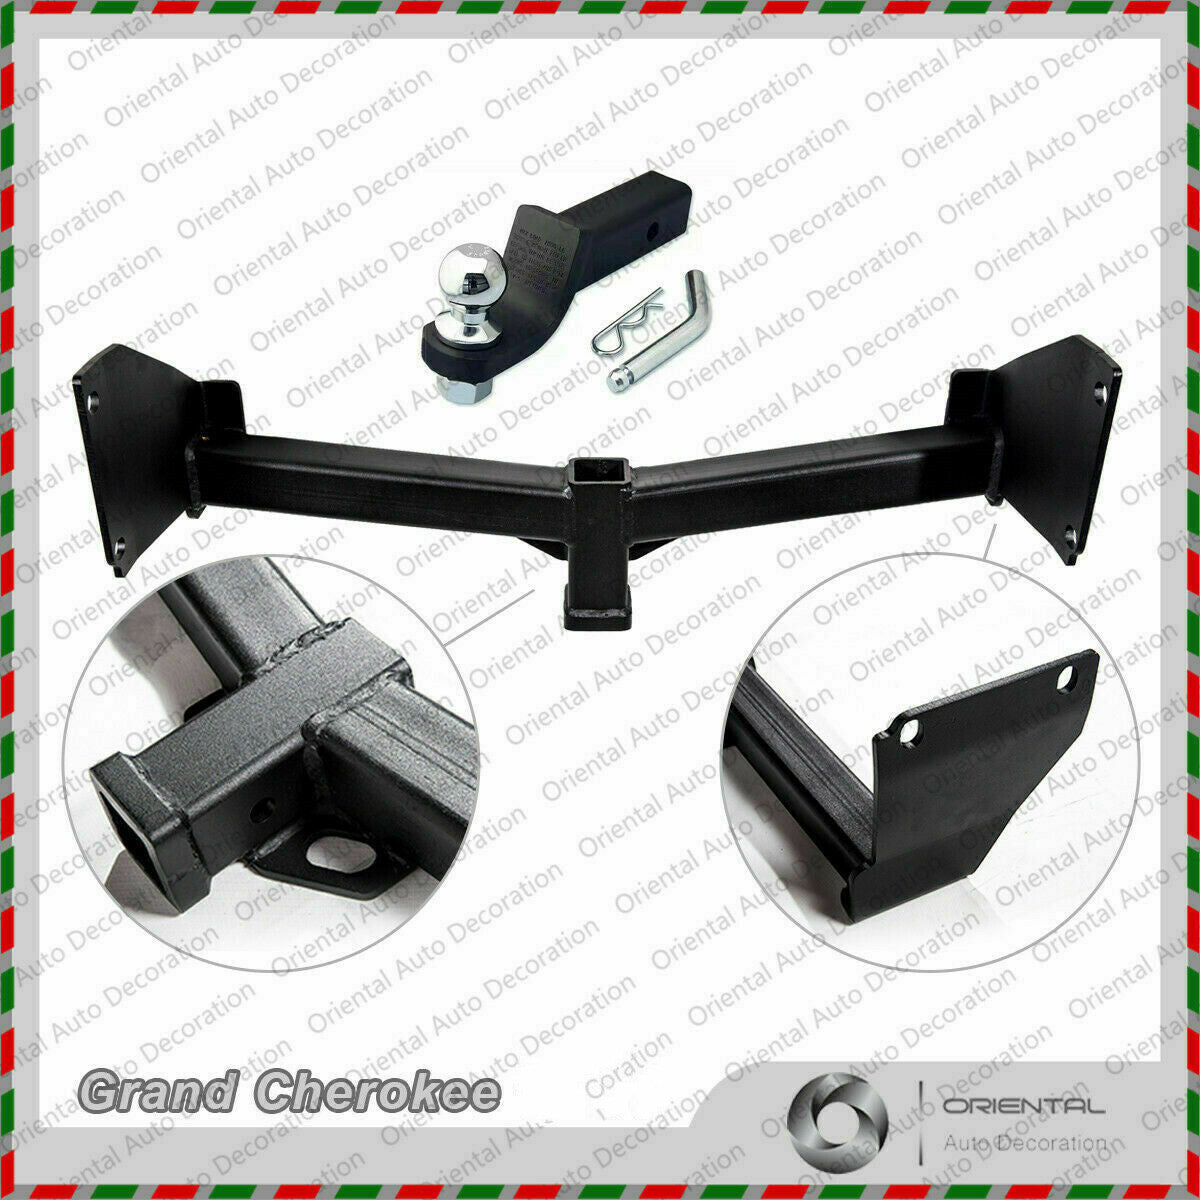 Heavy Duty 4" Tow Bar Tongue + Tow Ball for Jeep Grand Cherokee 2011-2013 Pick Up Only